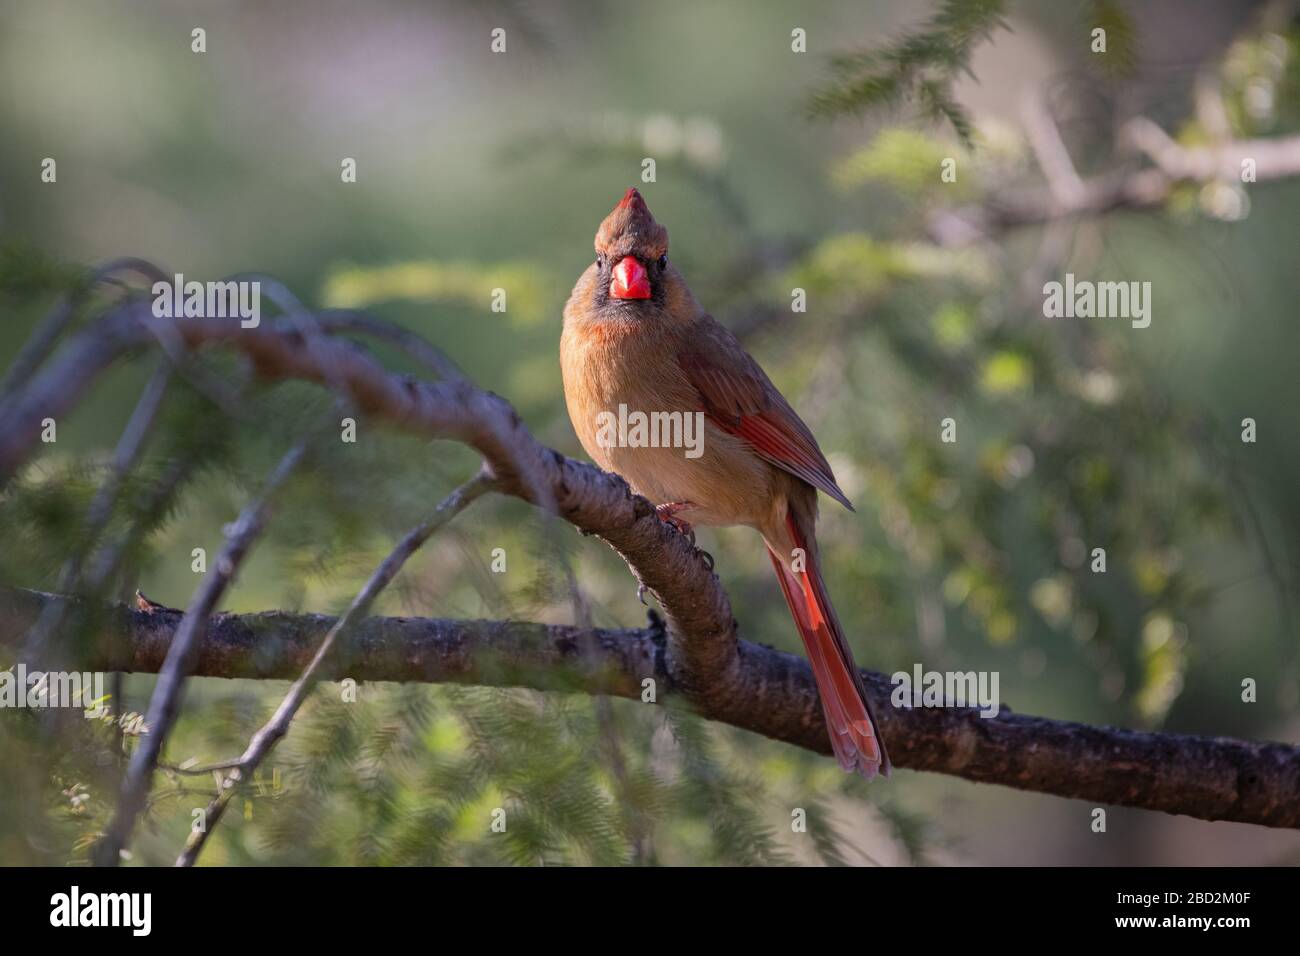 A female northern cardinal perched on a branch. Stock Photo